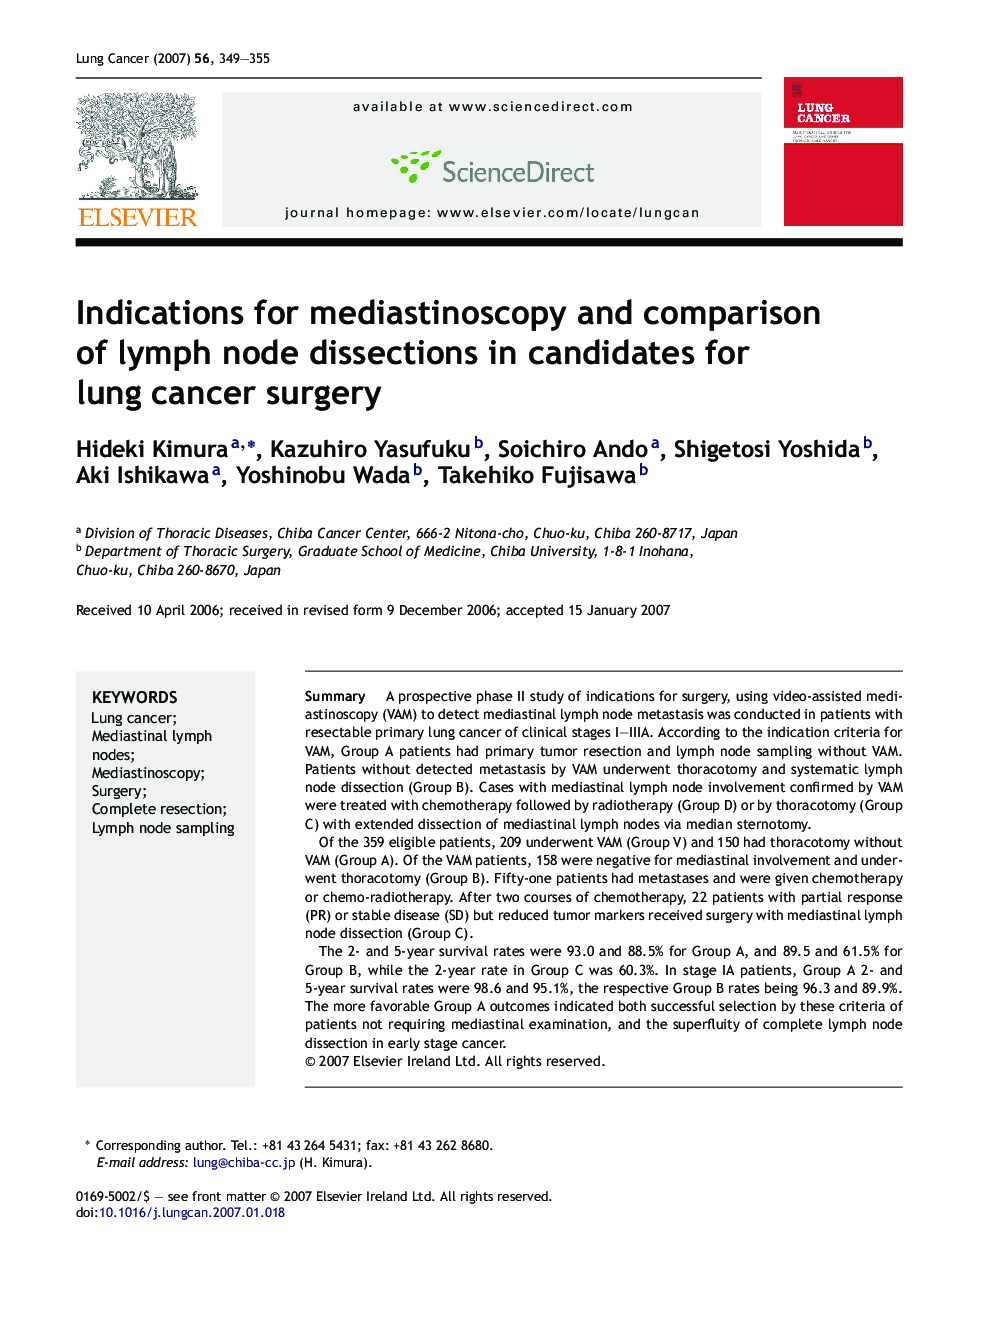 Indications for mediastinoscopy and comparison of lymph node dissections in candidates for lung cancer surgery